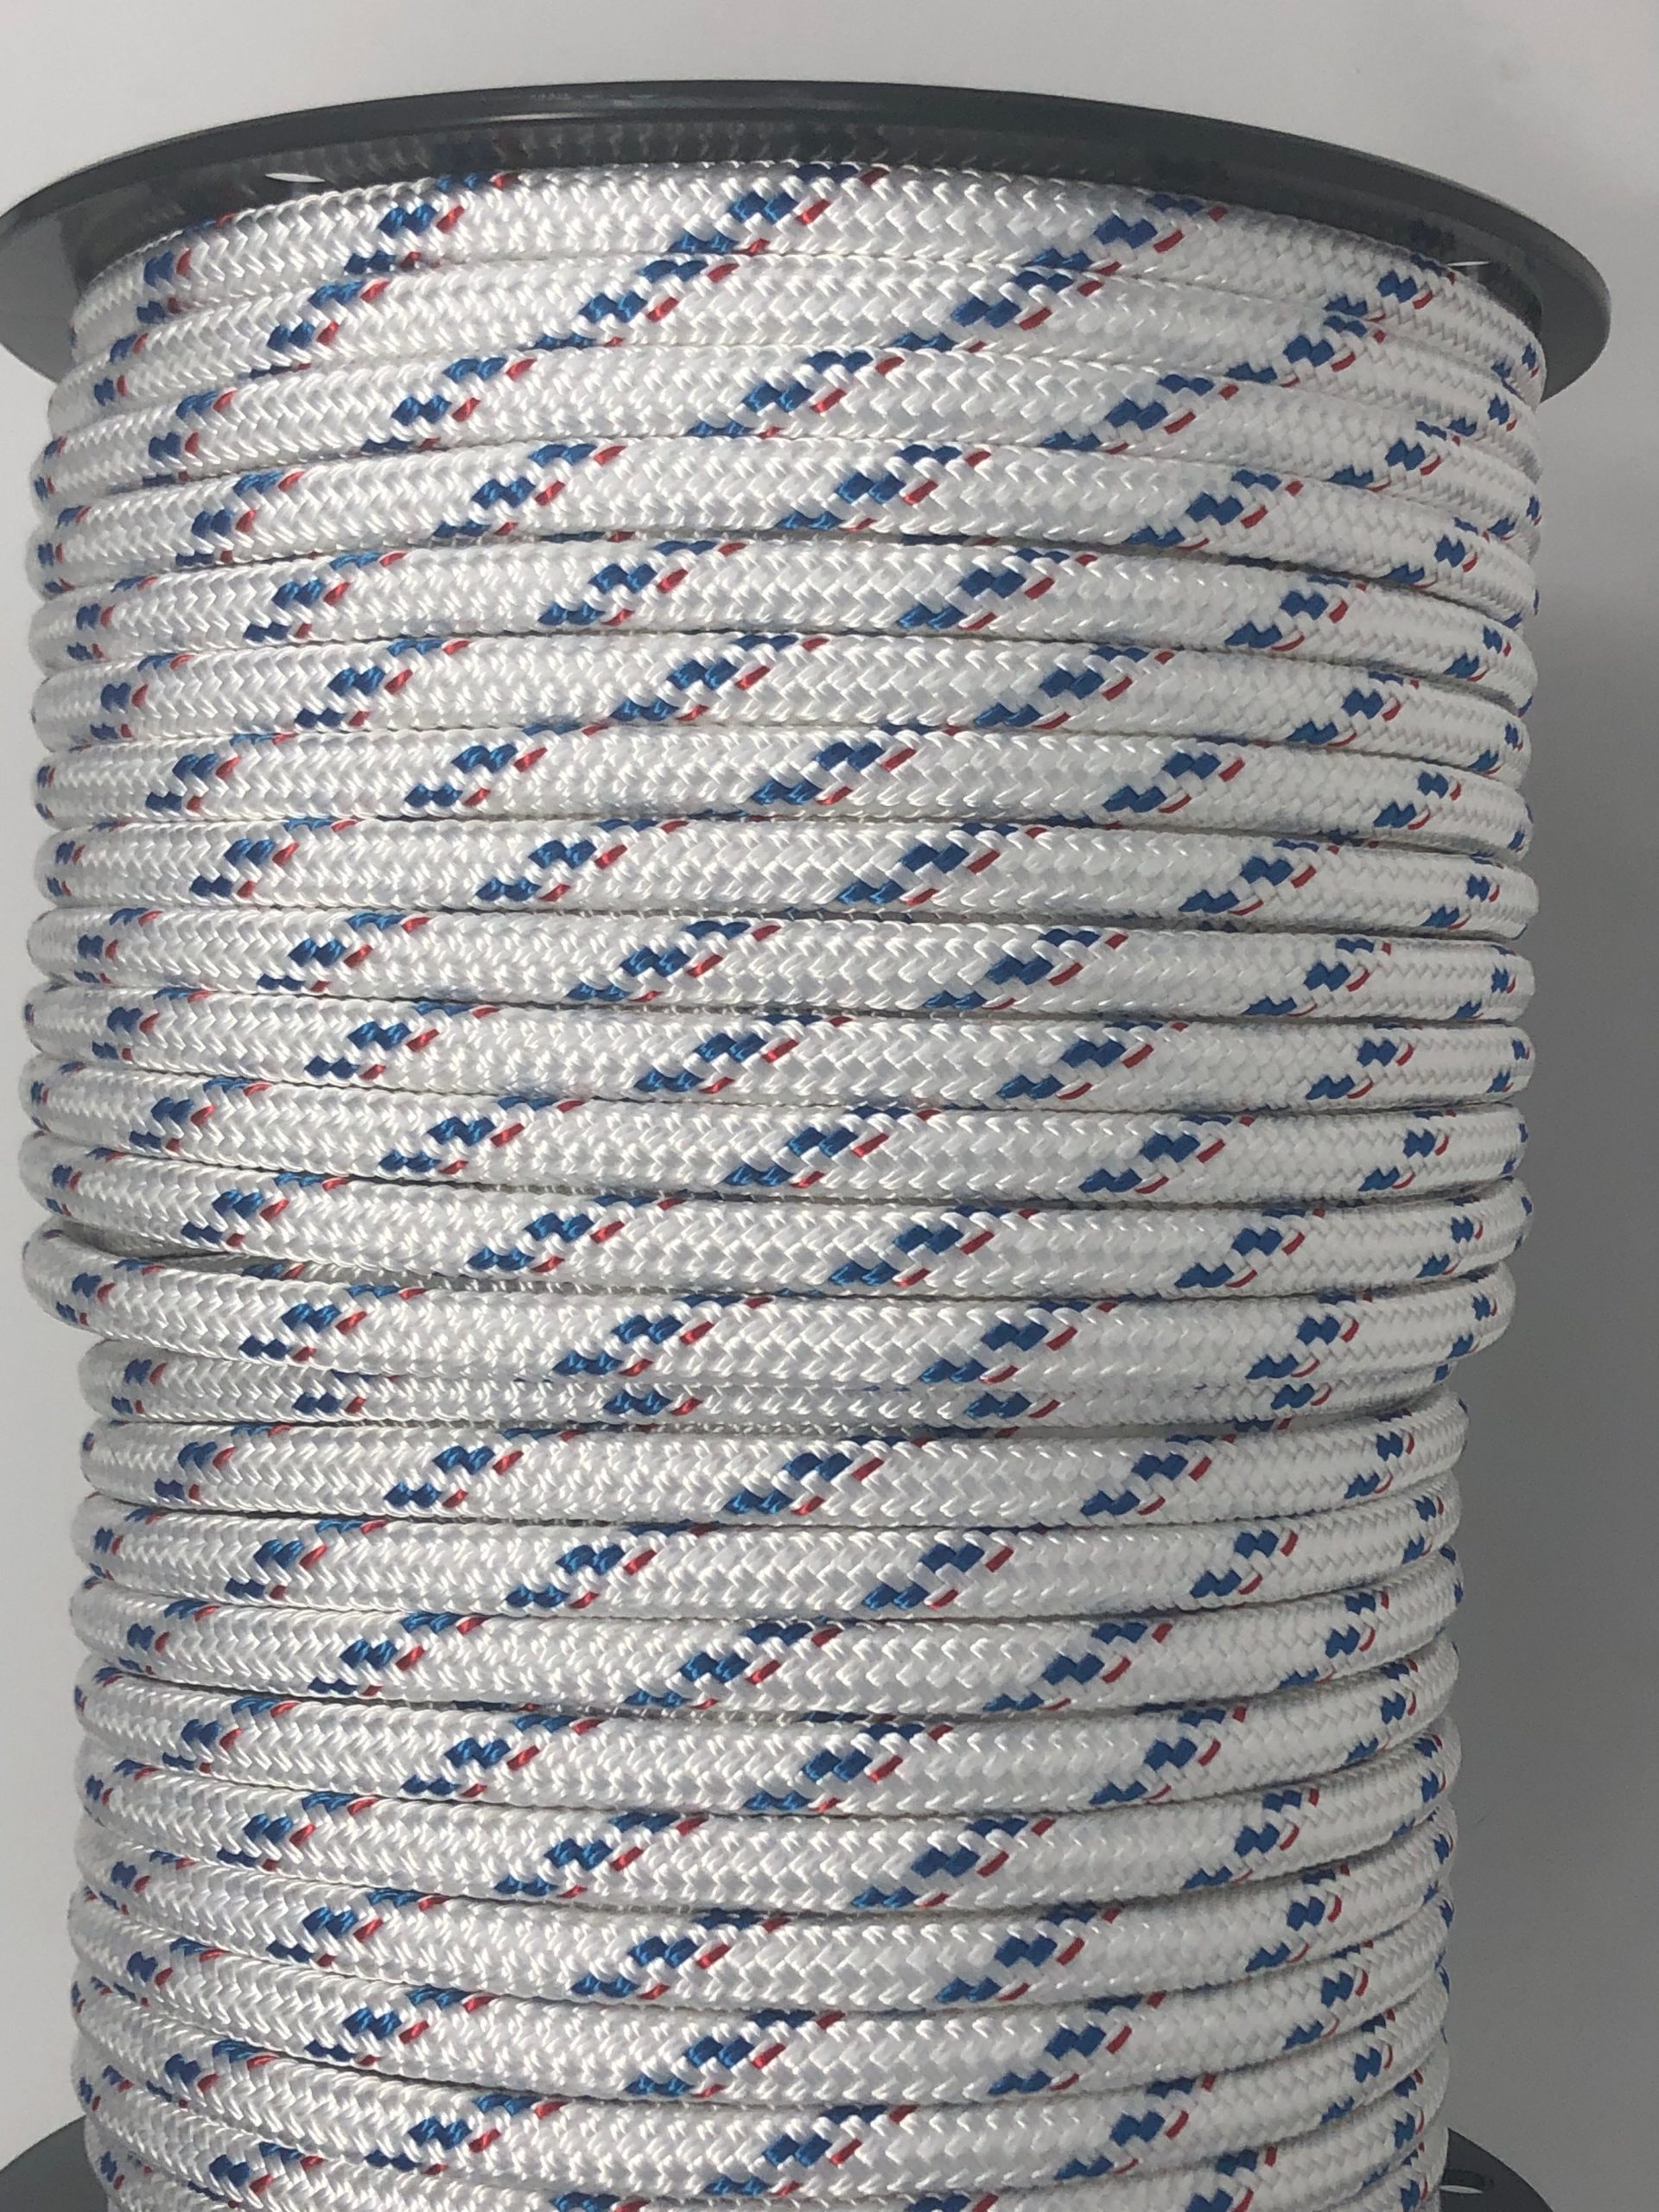 Light Gray Double Braid-Yacht Braid Polyester rope 5/16 " x 100 ft